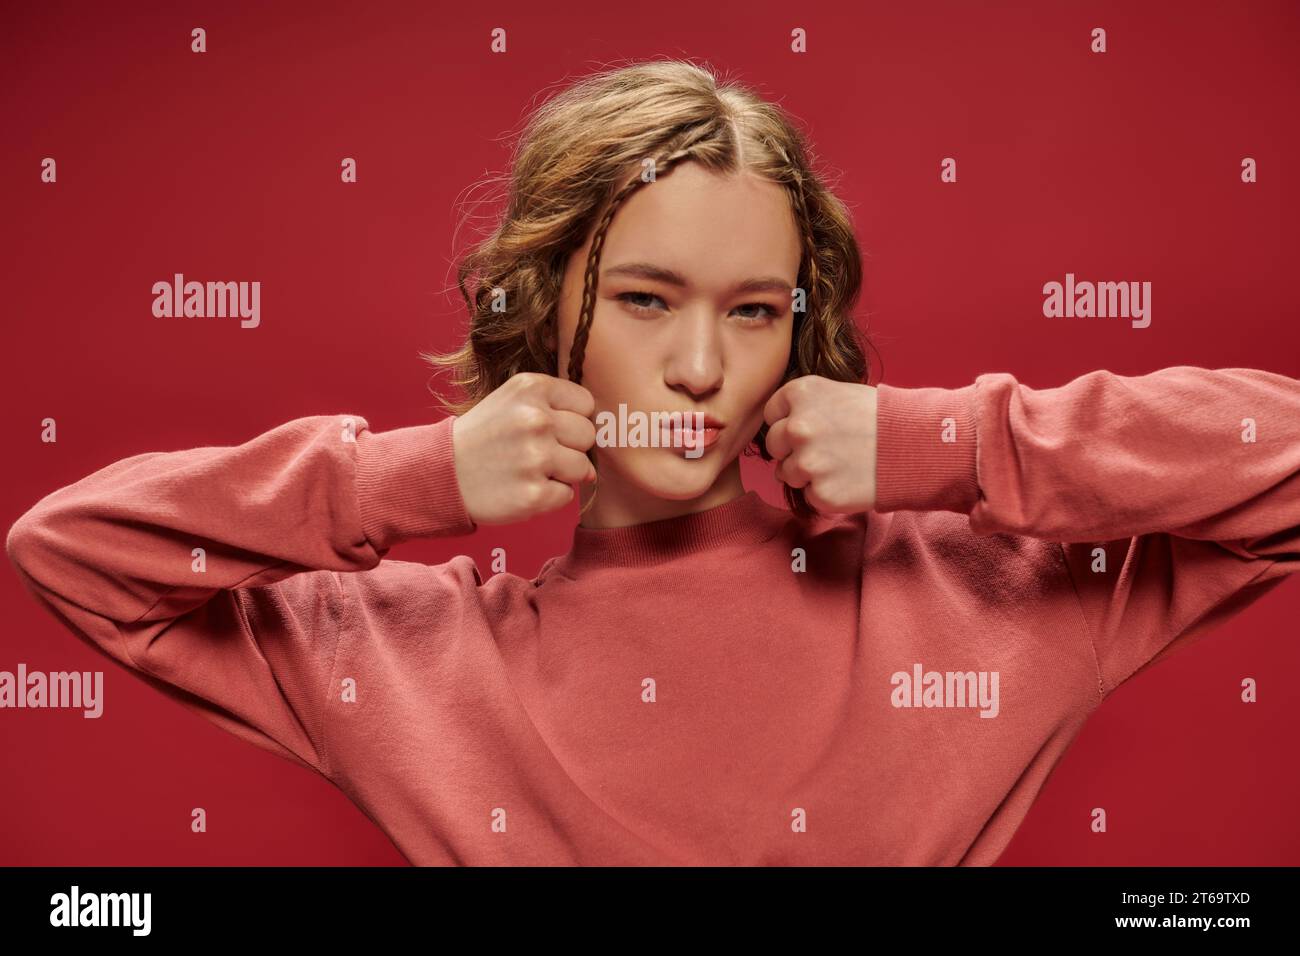 cute gen z girl with short hair and braids posing with clenched fists and looking at camera on red Stock Photo